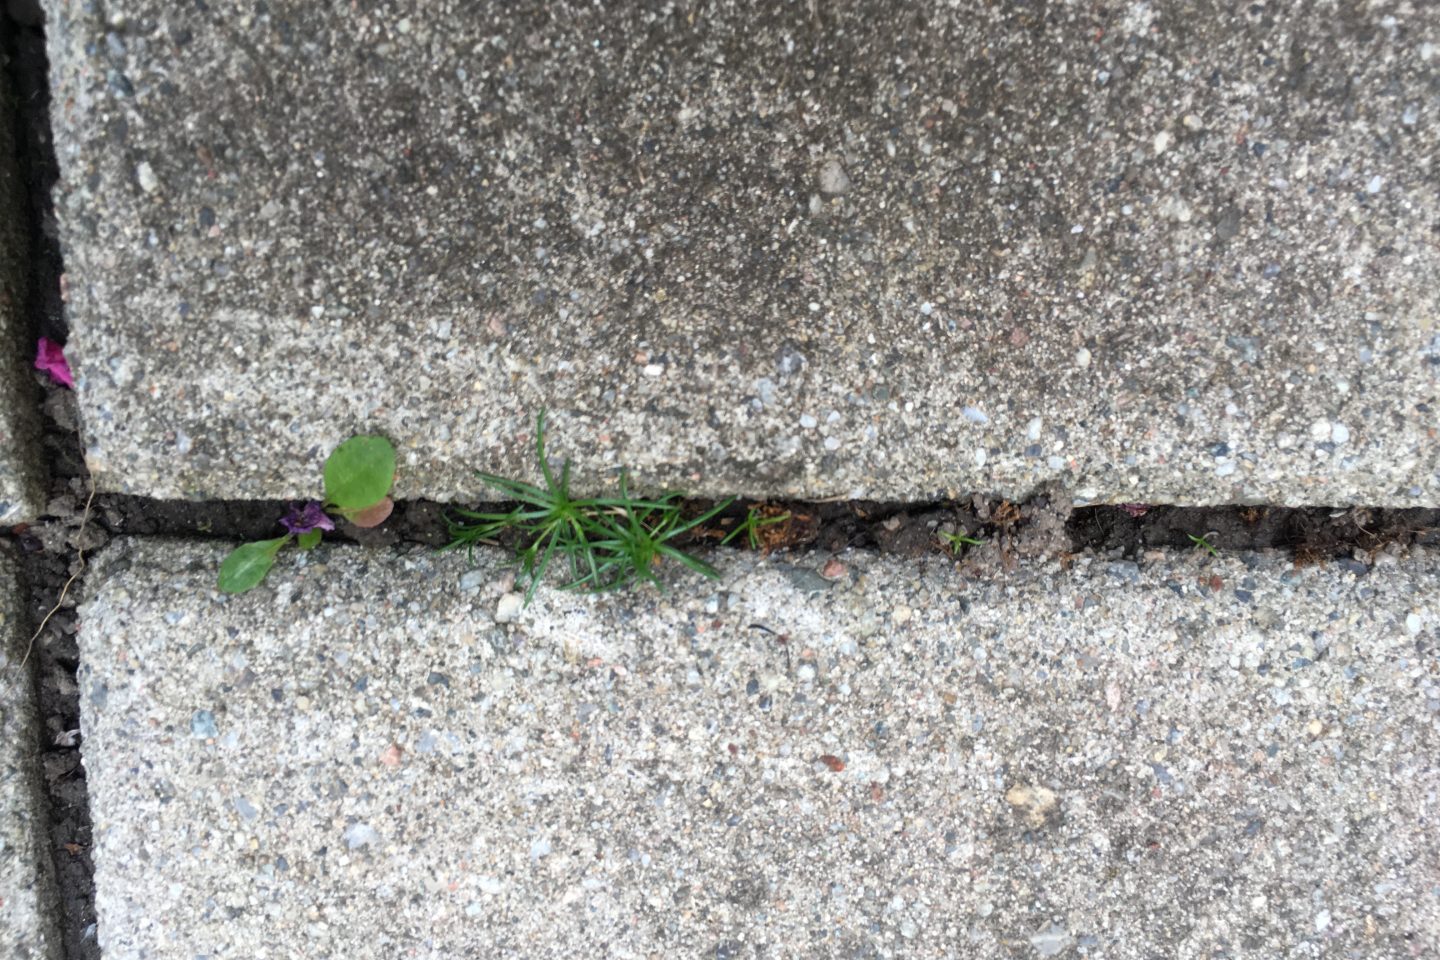 How to stop weeds from growing between pavers?